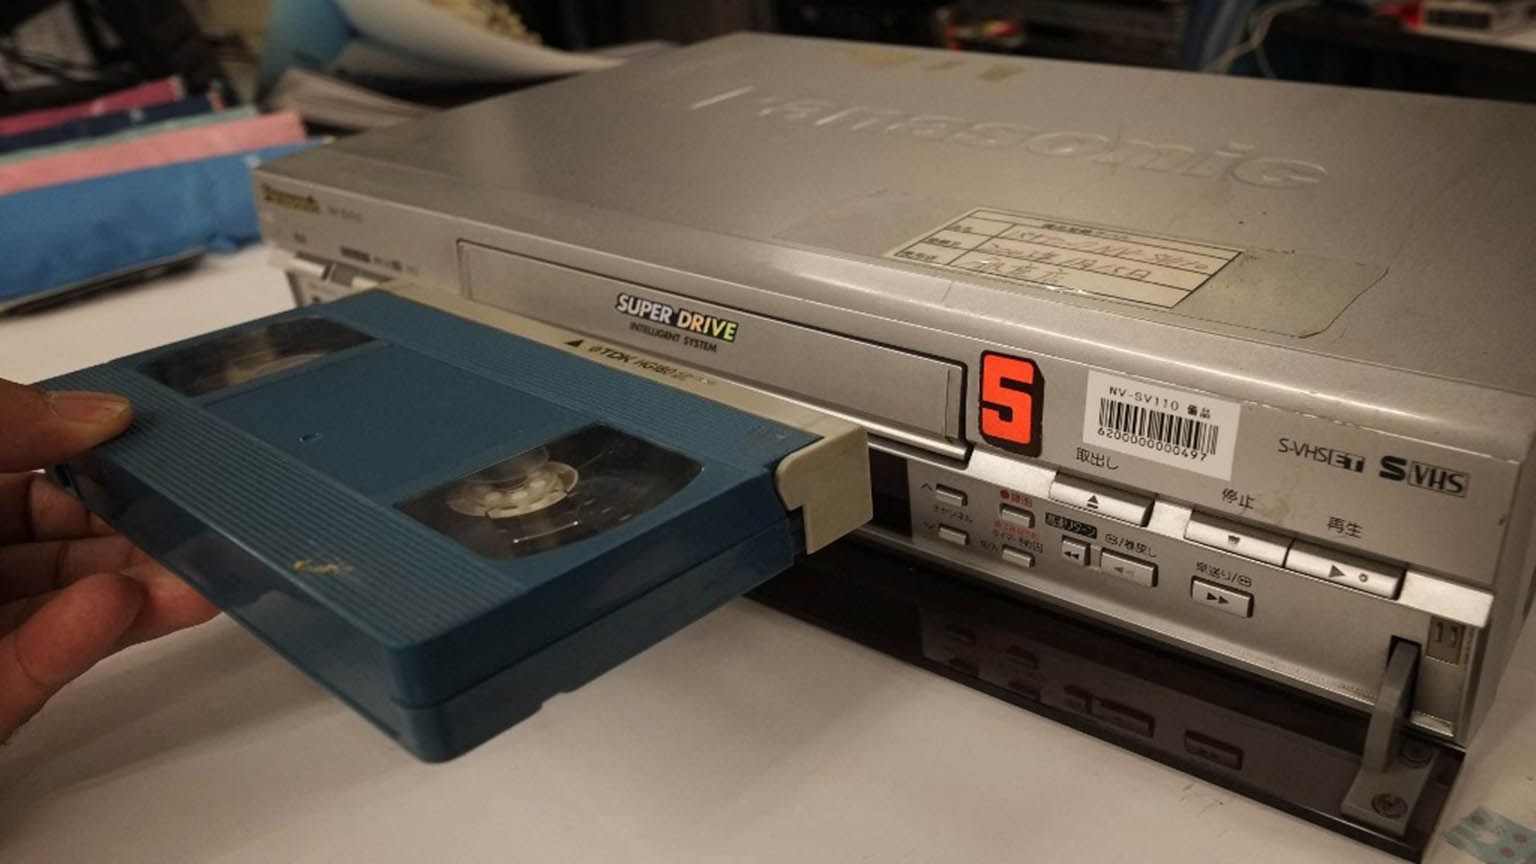 VHS tapes spur collecting frenzy